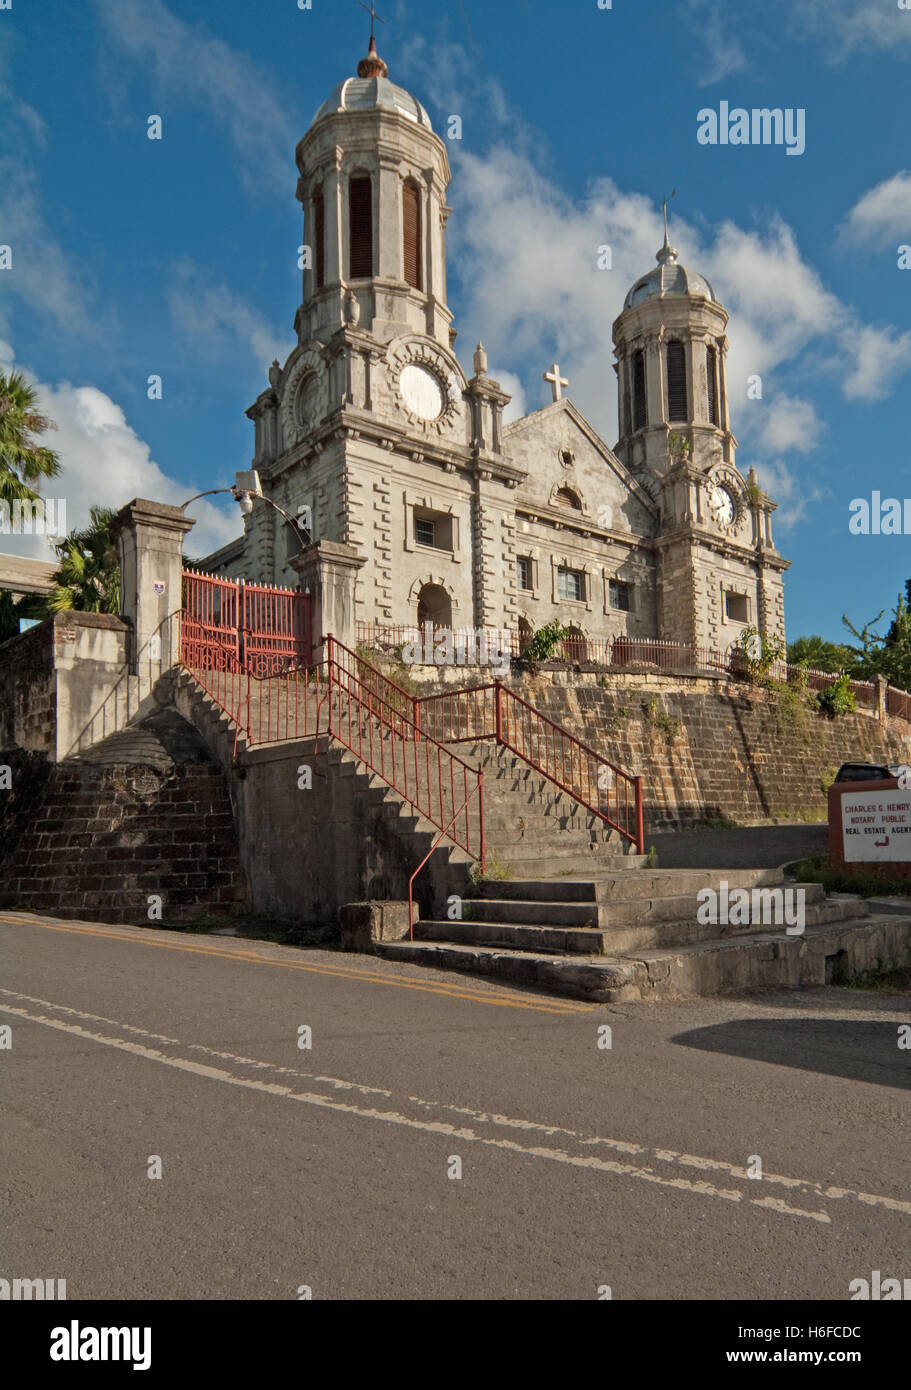 Antigua, St Johns, St Johns Cathedral, Anglican, Caribbean, West Indies, Stock Photo